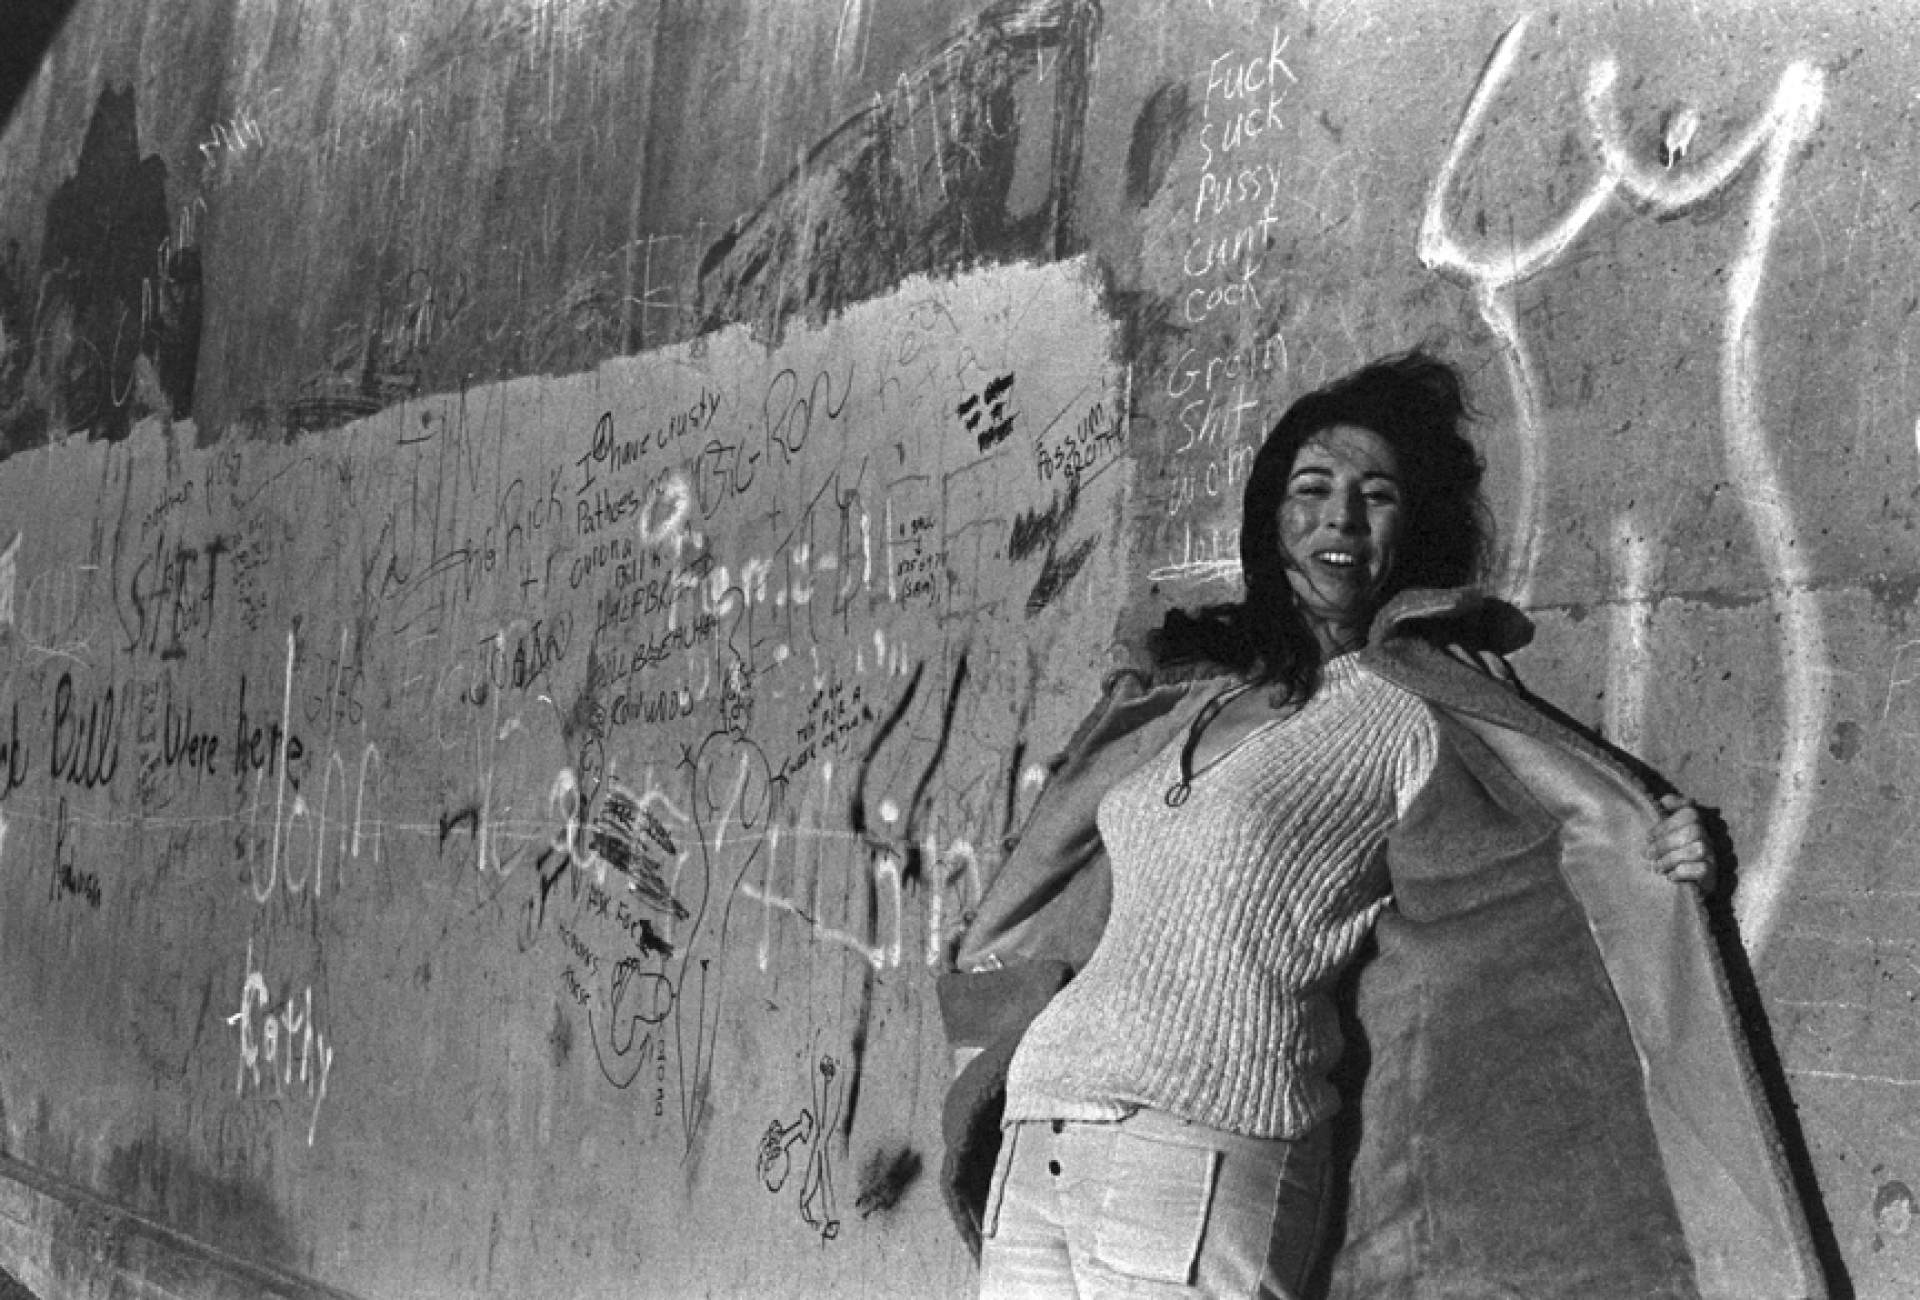 Bruce Jackson Being There, Diane and the Graffiti